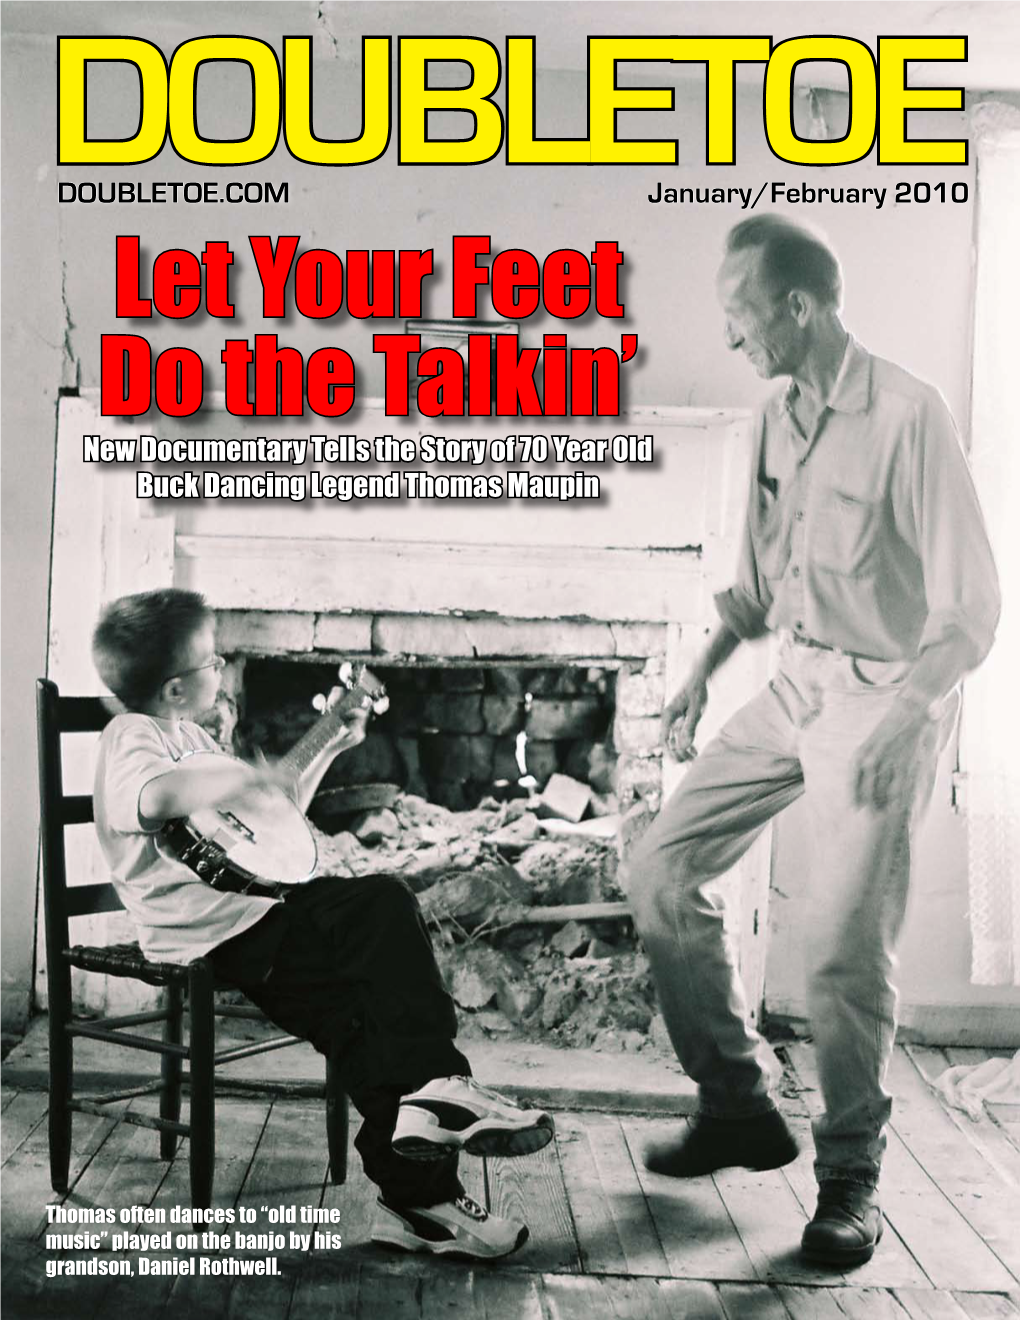 DOUBLETOE.COM January/February 2010 Let Your Feet Do the Talkin’ New Documentary Tells the Story of 70 Year Old Buck Dancing Legend Thomas Maupin